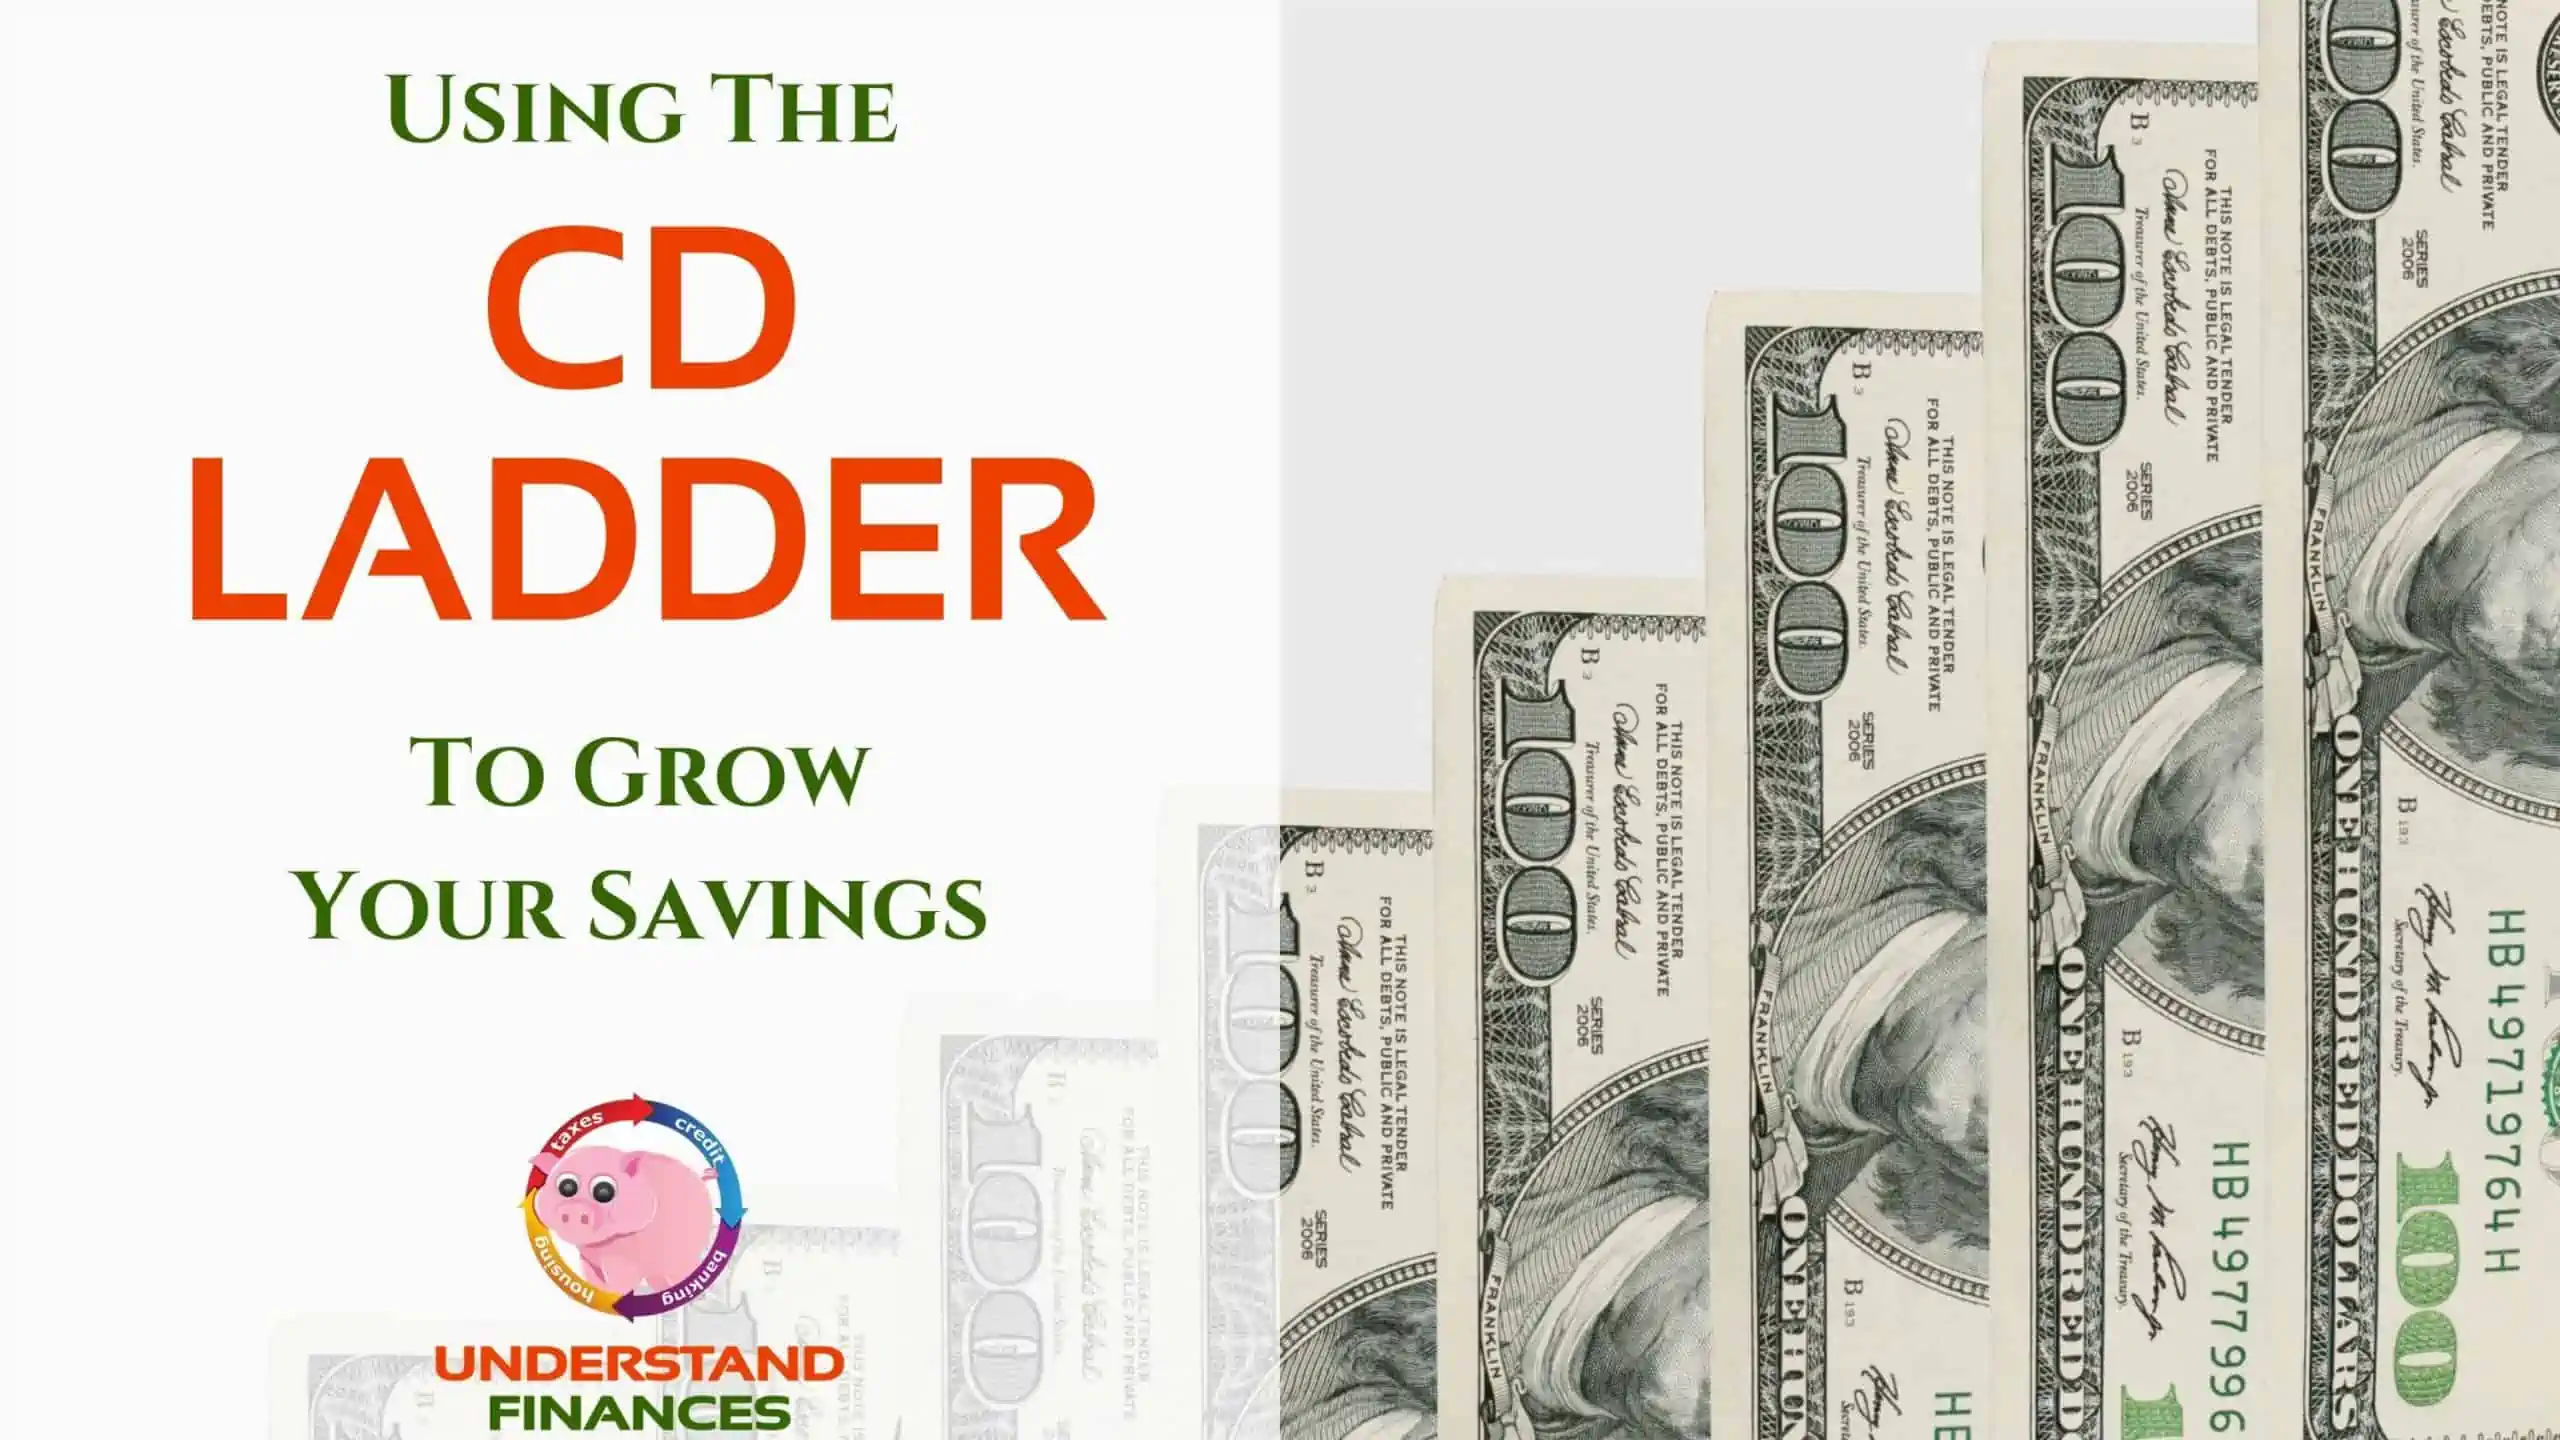 Using The CD Ladder To Grow Your Savings